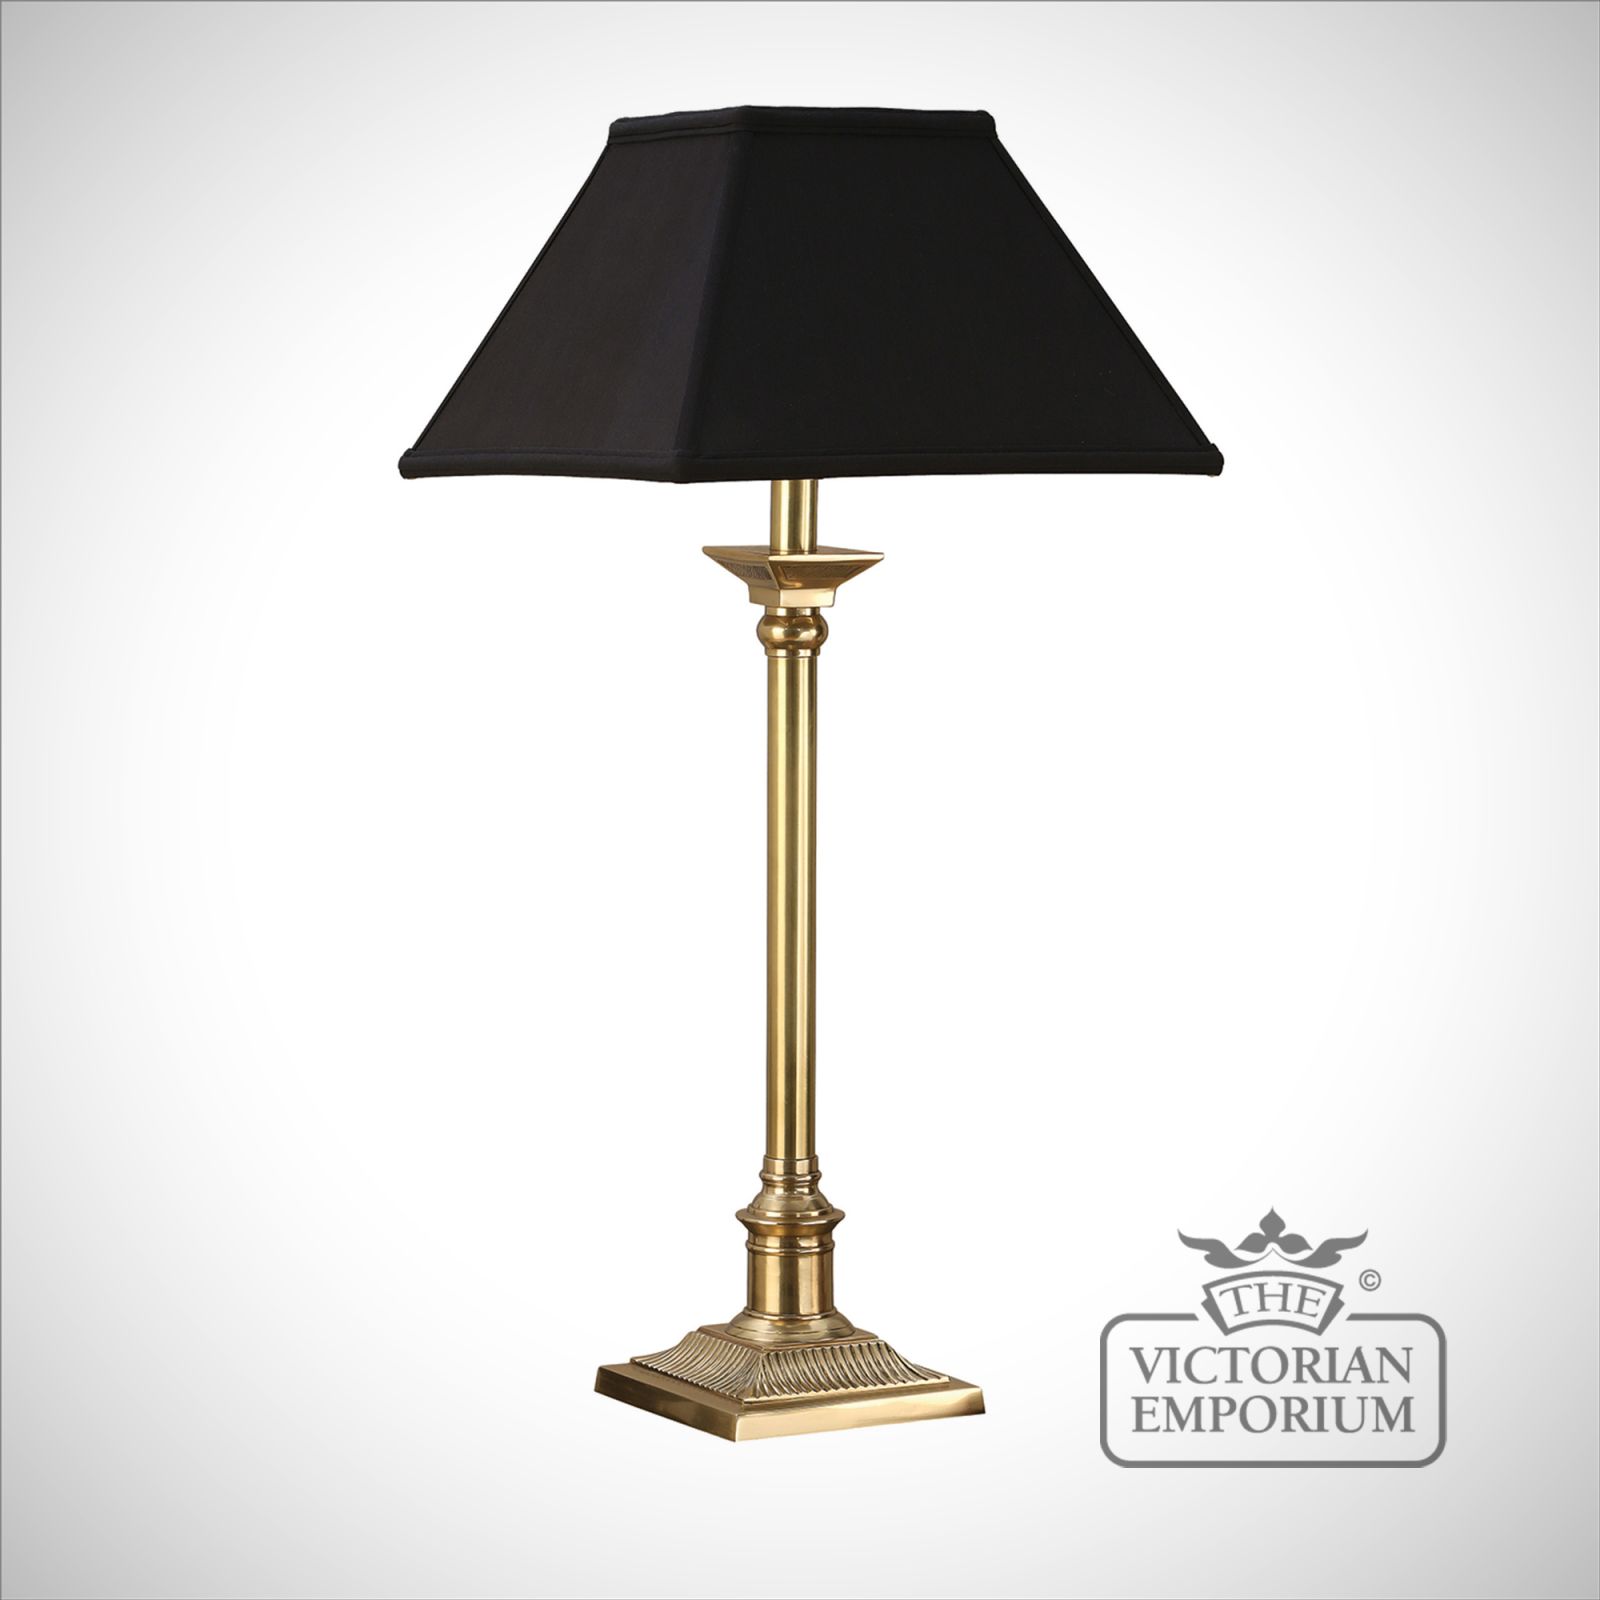 Grenville table lamp